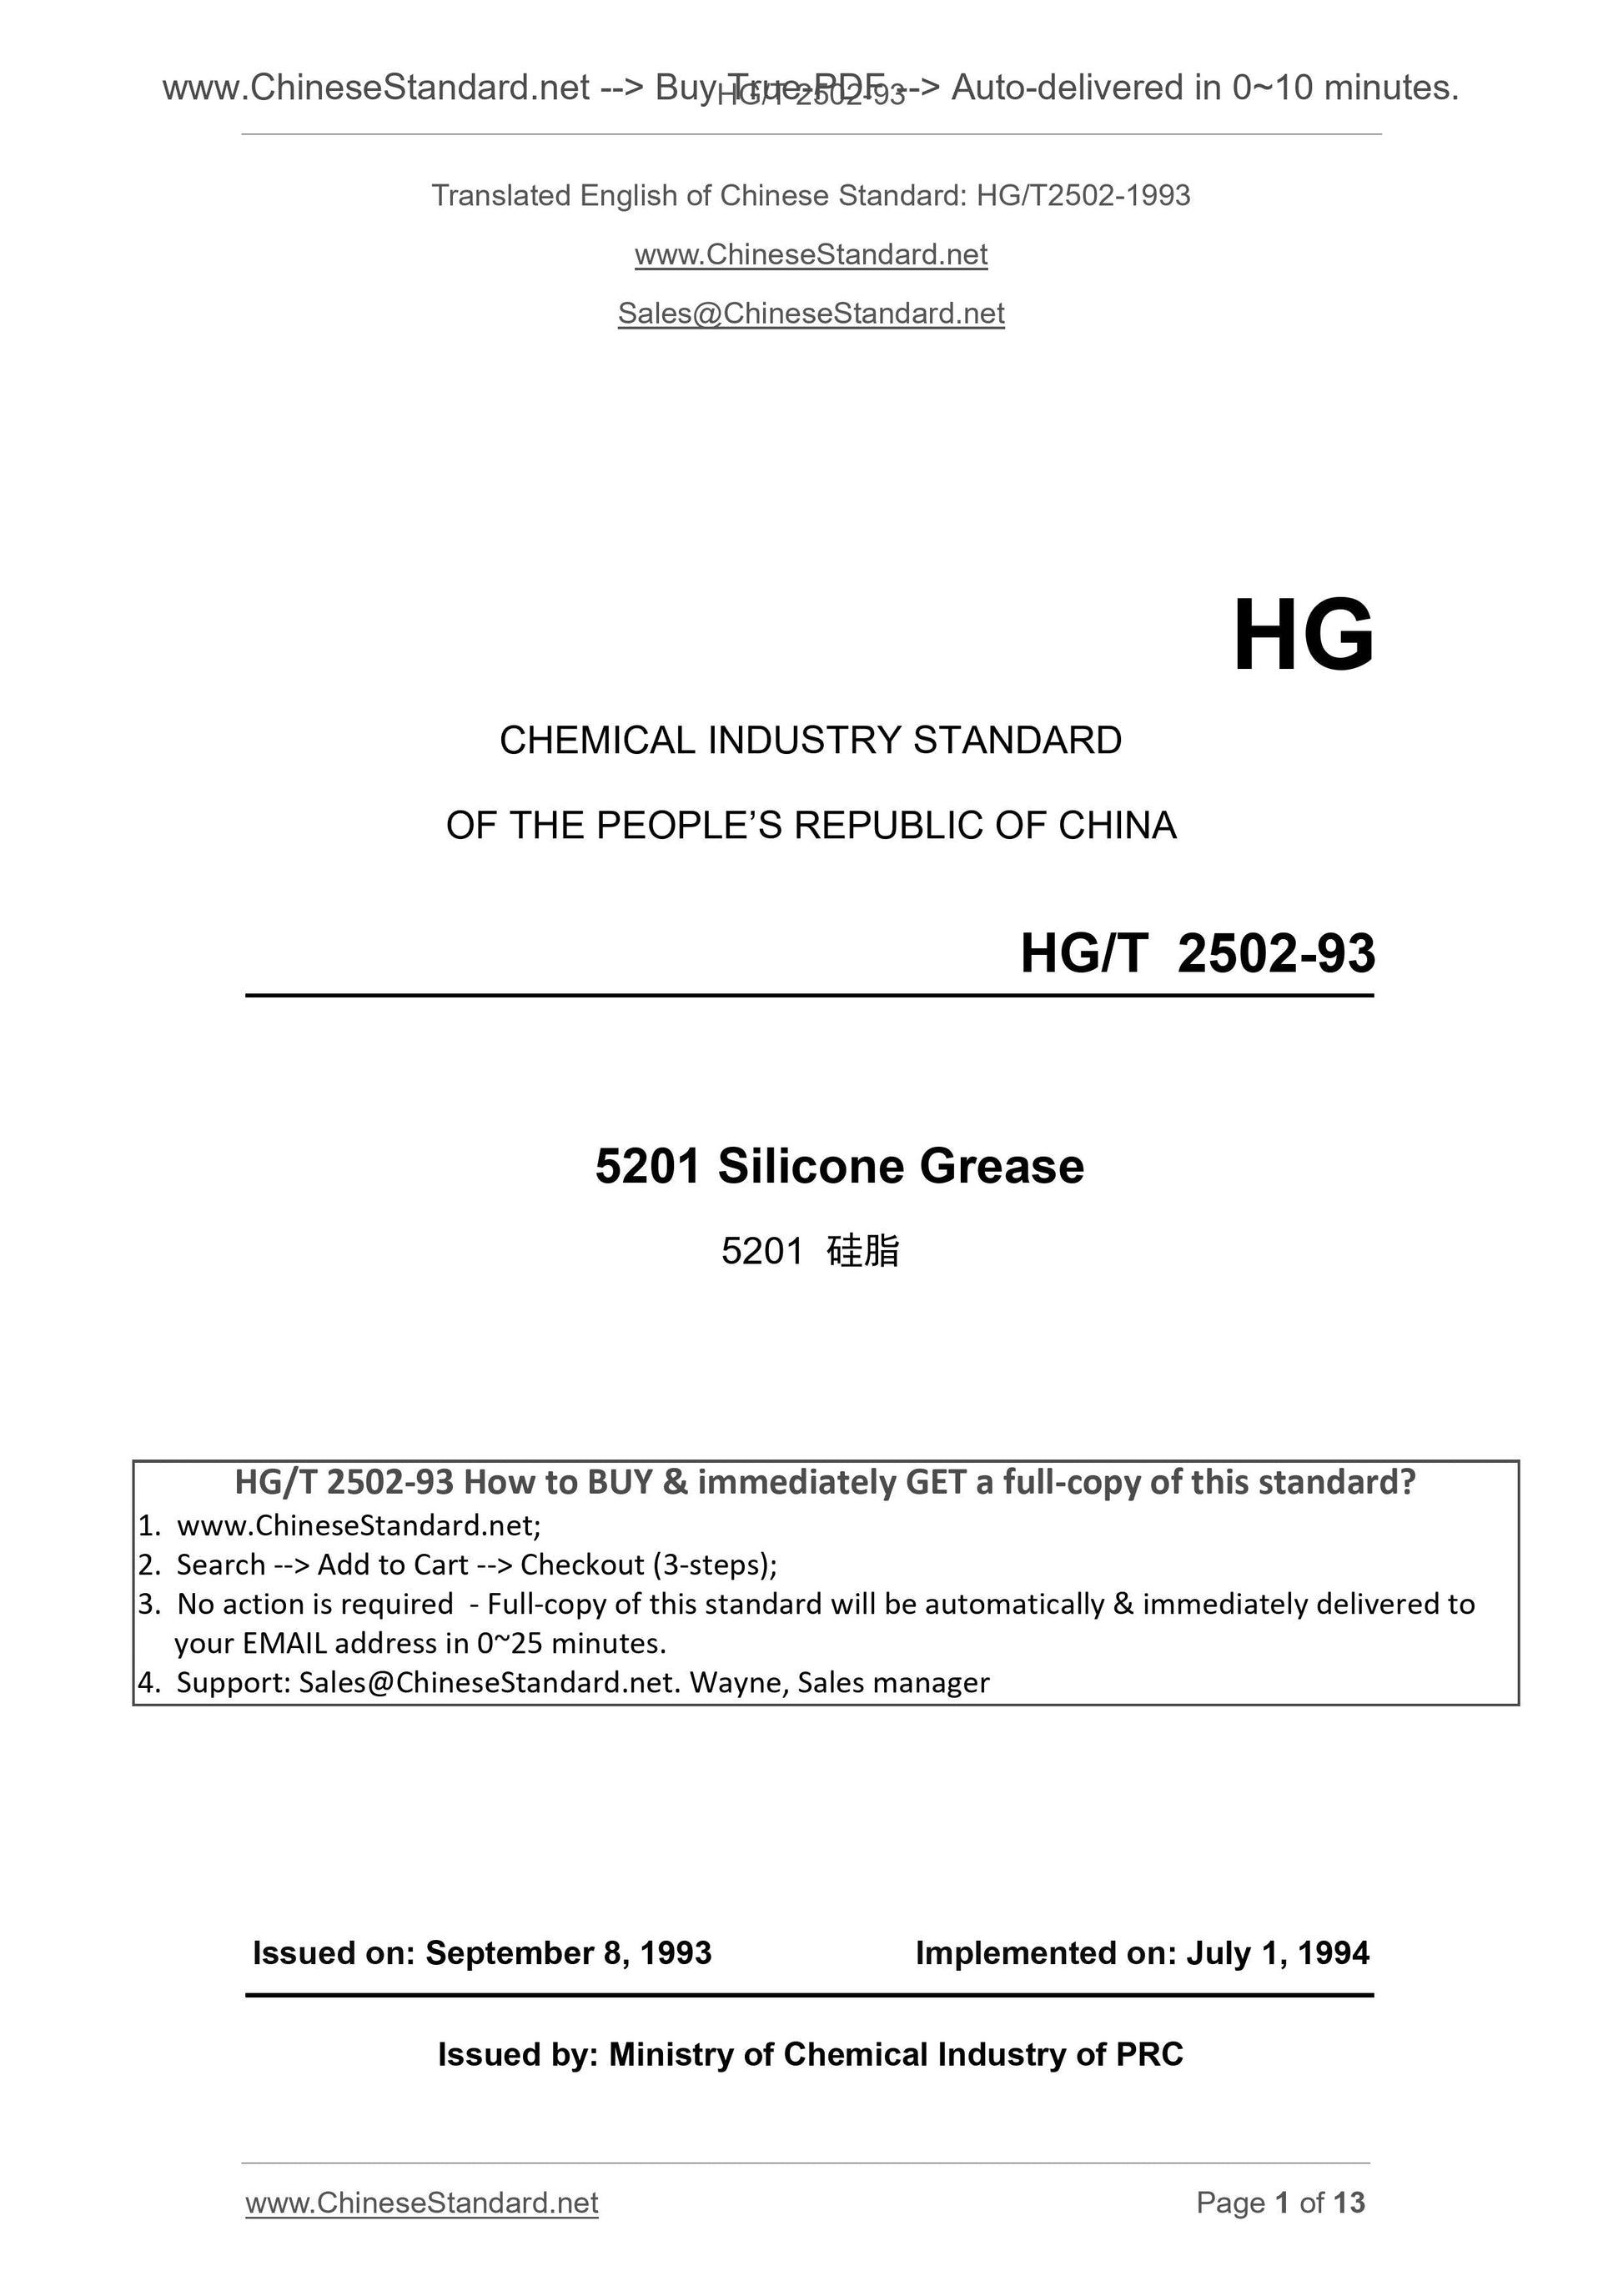 HG/T 2502-1993 Page 1